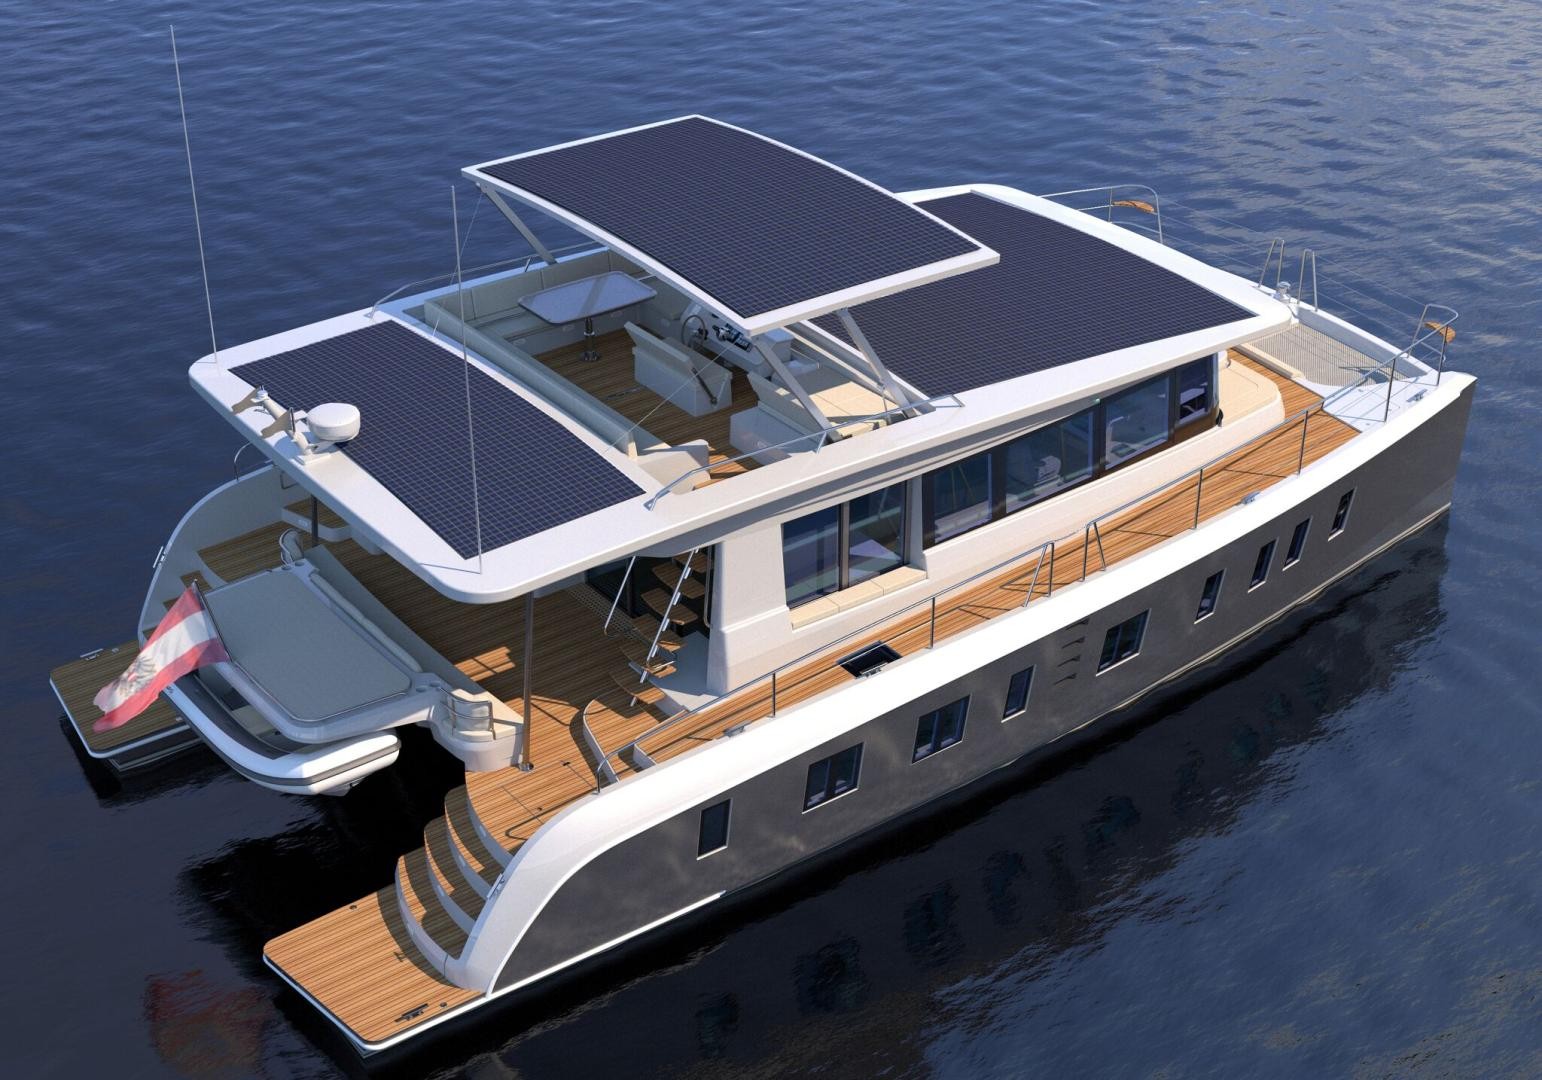 SILENT-YACHTS is proud to introduce the SILENT 55